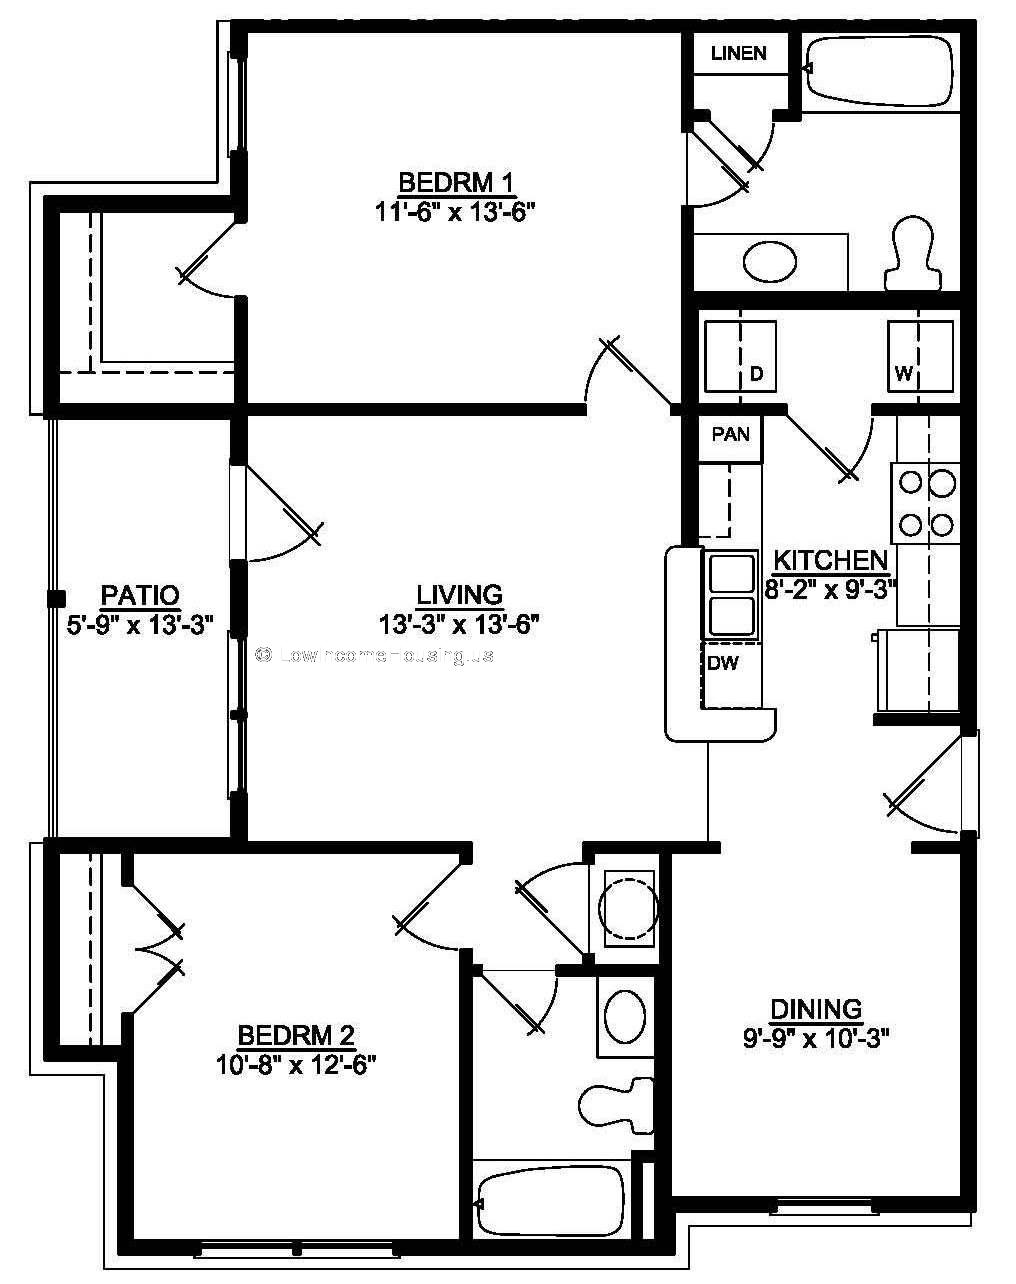 Large bedroom (11' x 13') Dining area (9' x 10') Large living area ( 13' x 13')